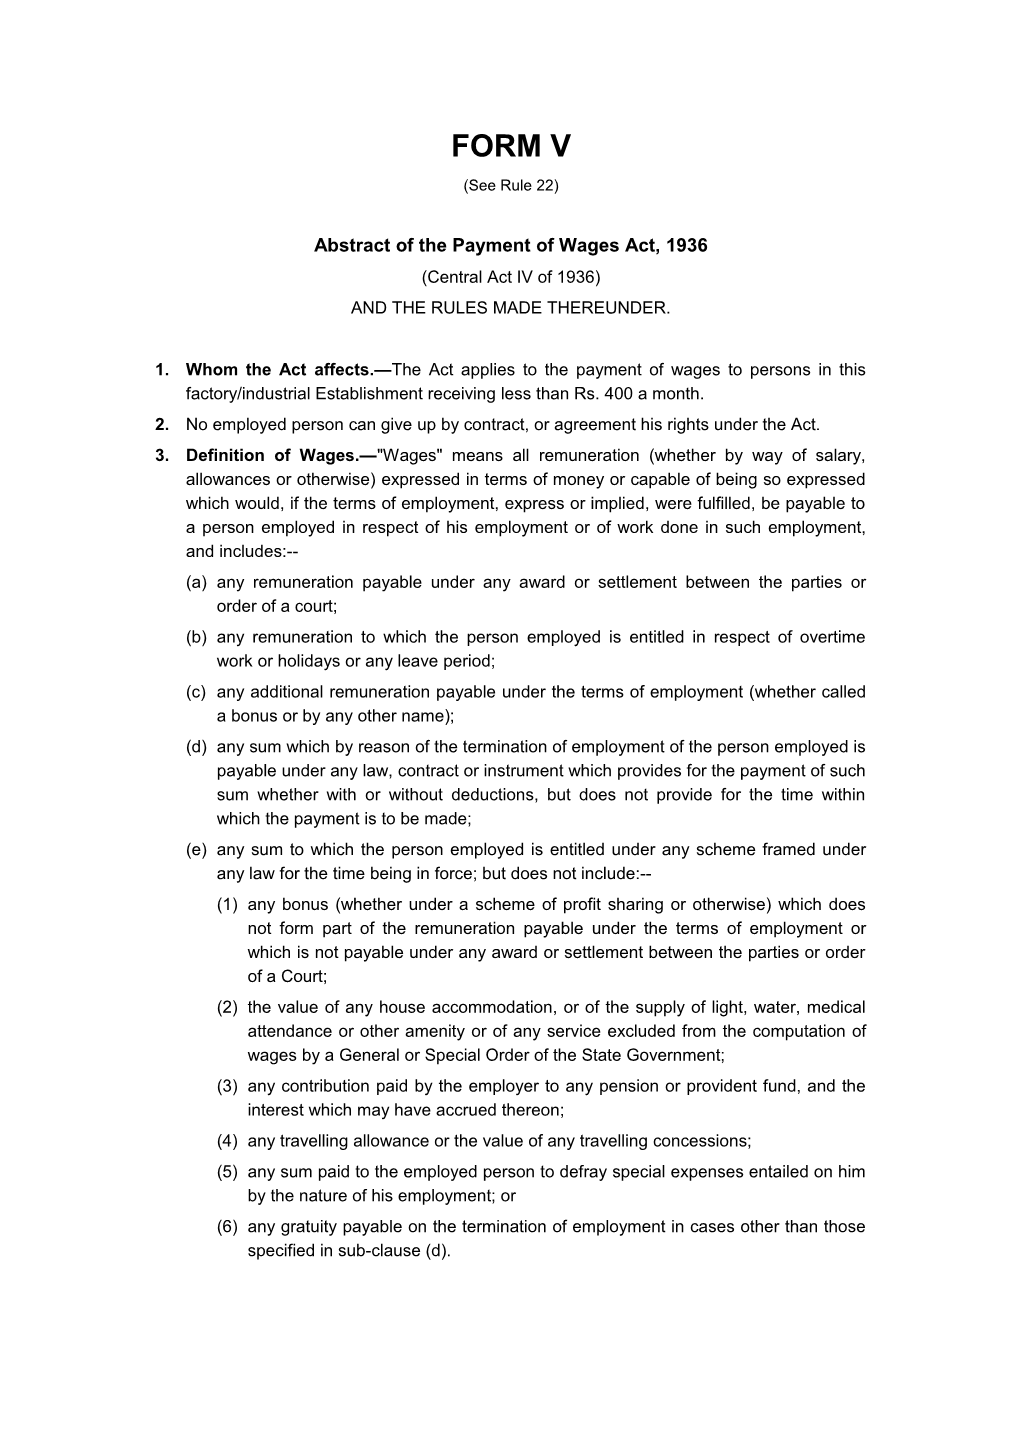 Abstract of the Payment of Wages Act, 1936